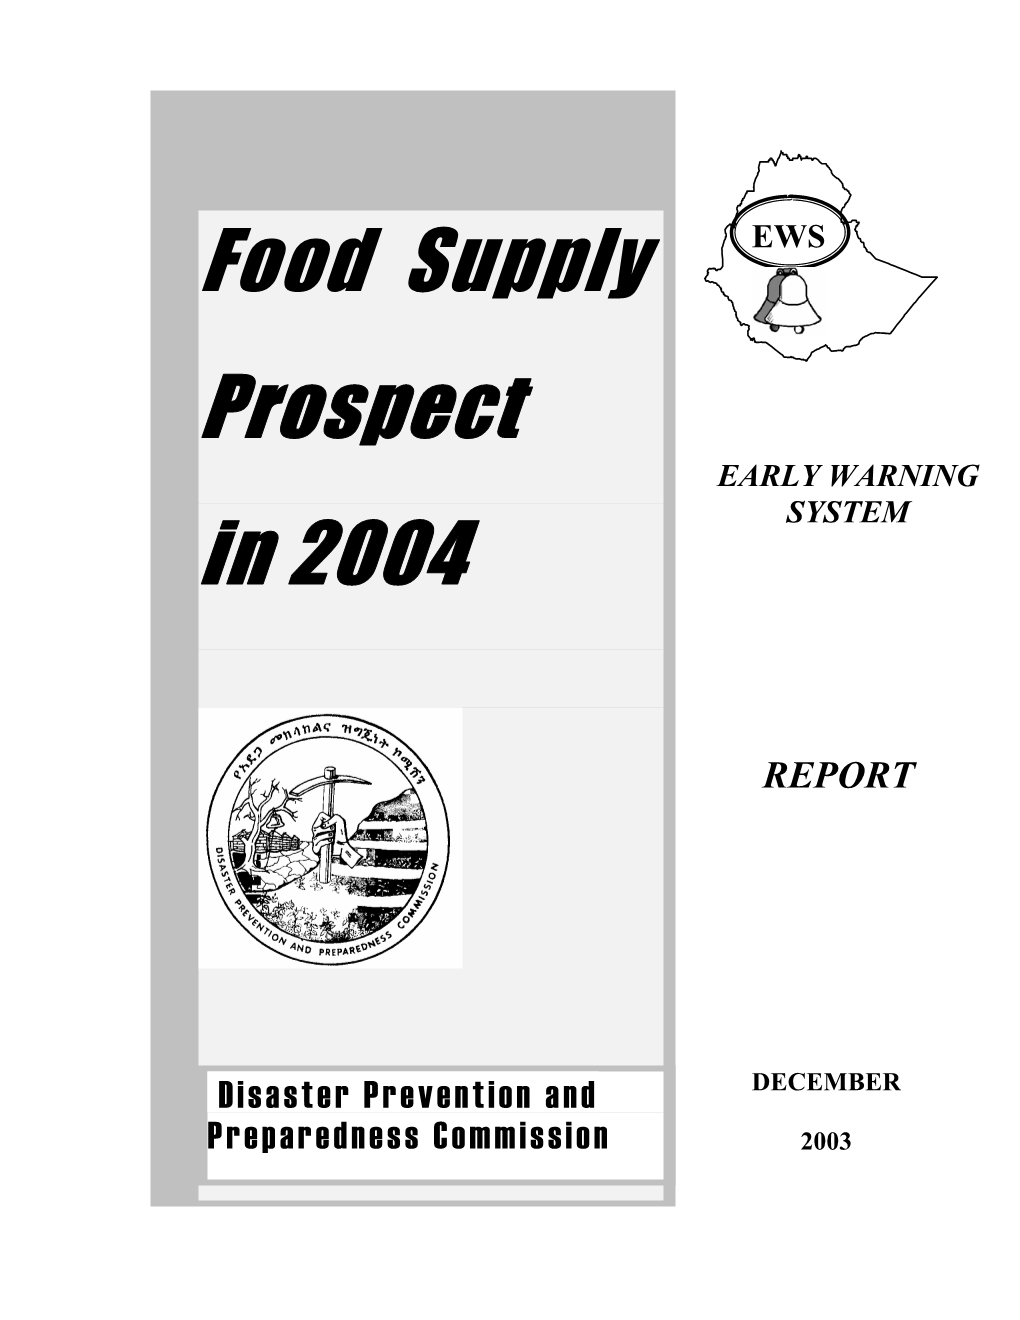 Food Supply Prospect in 2004